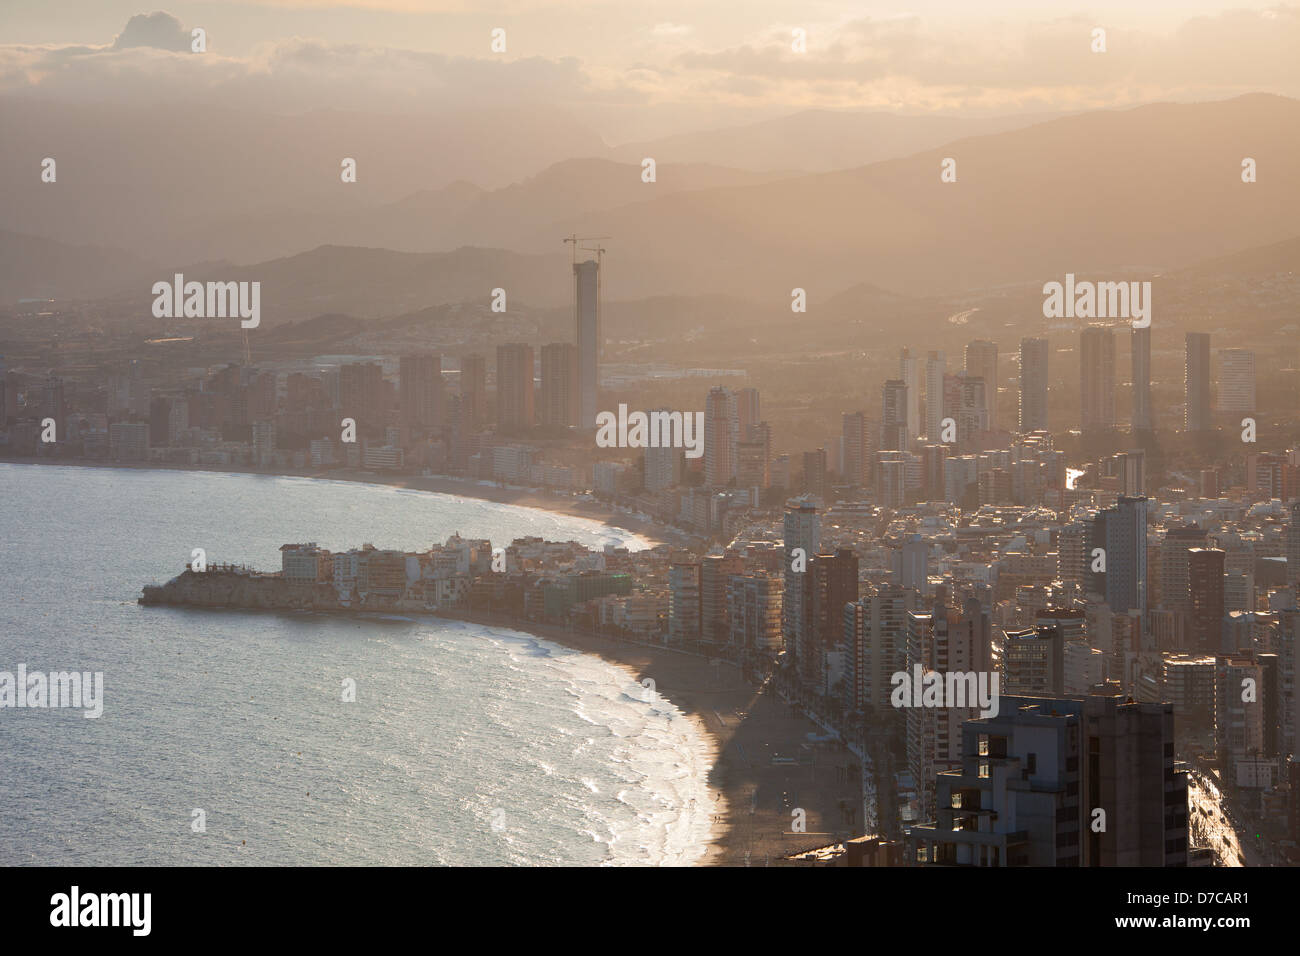 Famous Spanish city Benidorm at sunset - Levante beach at foreground Stock Photo